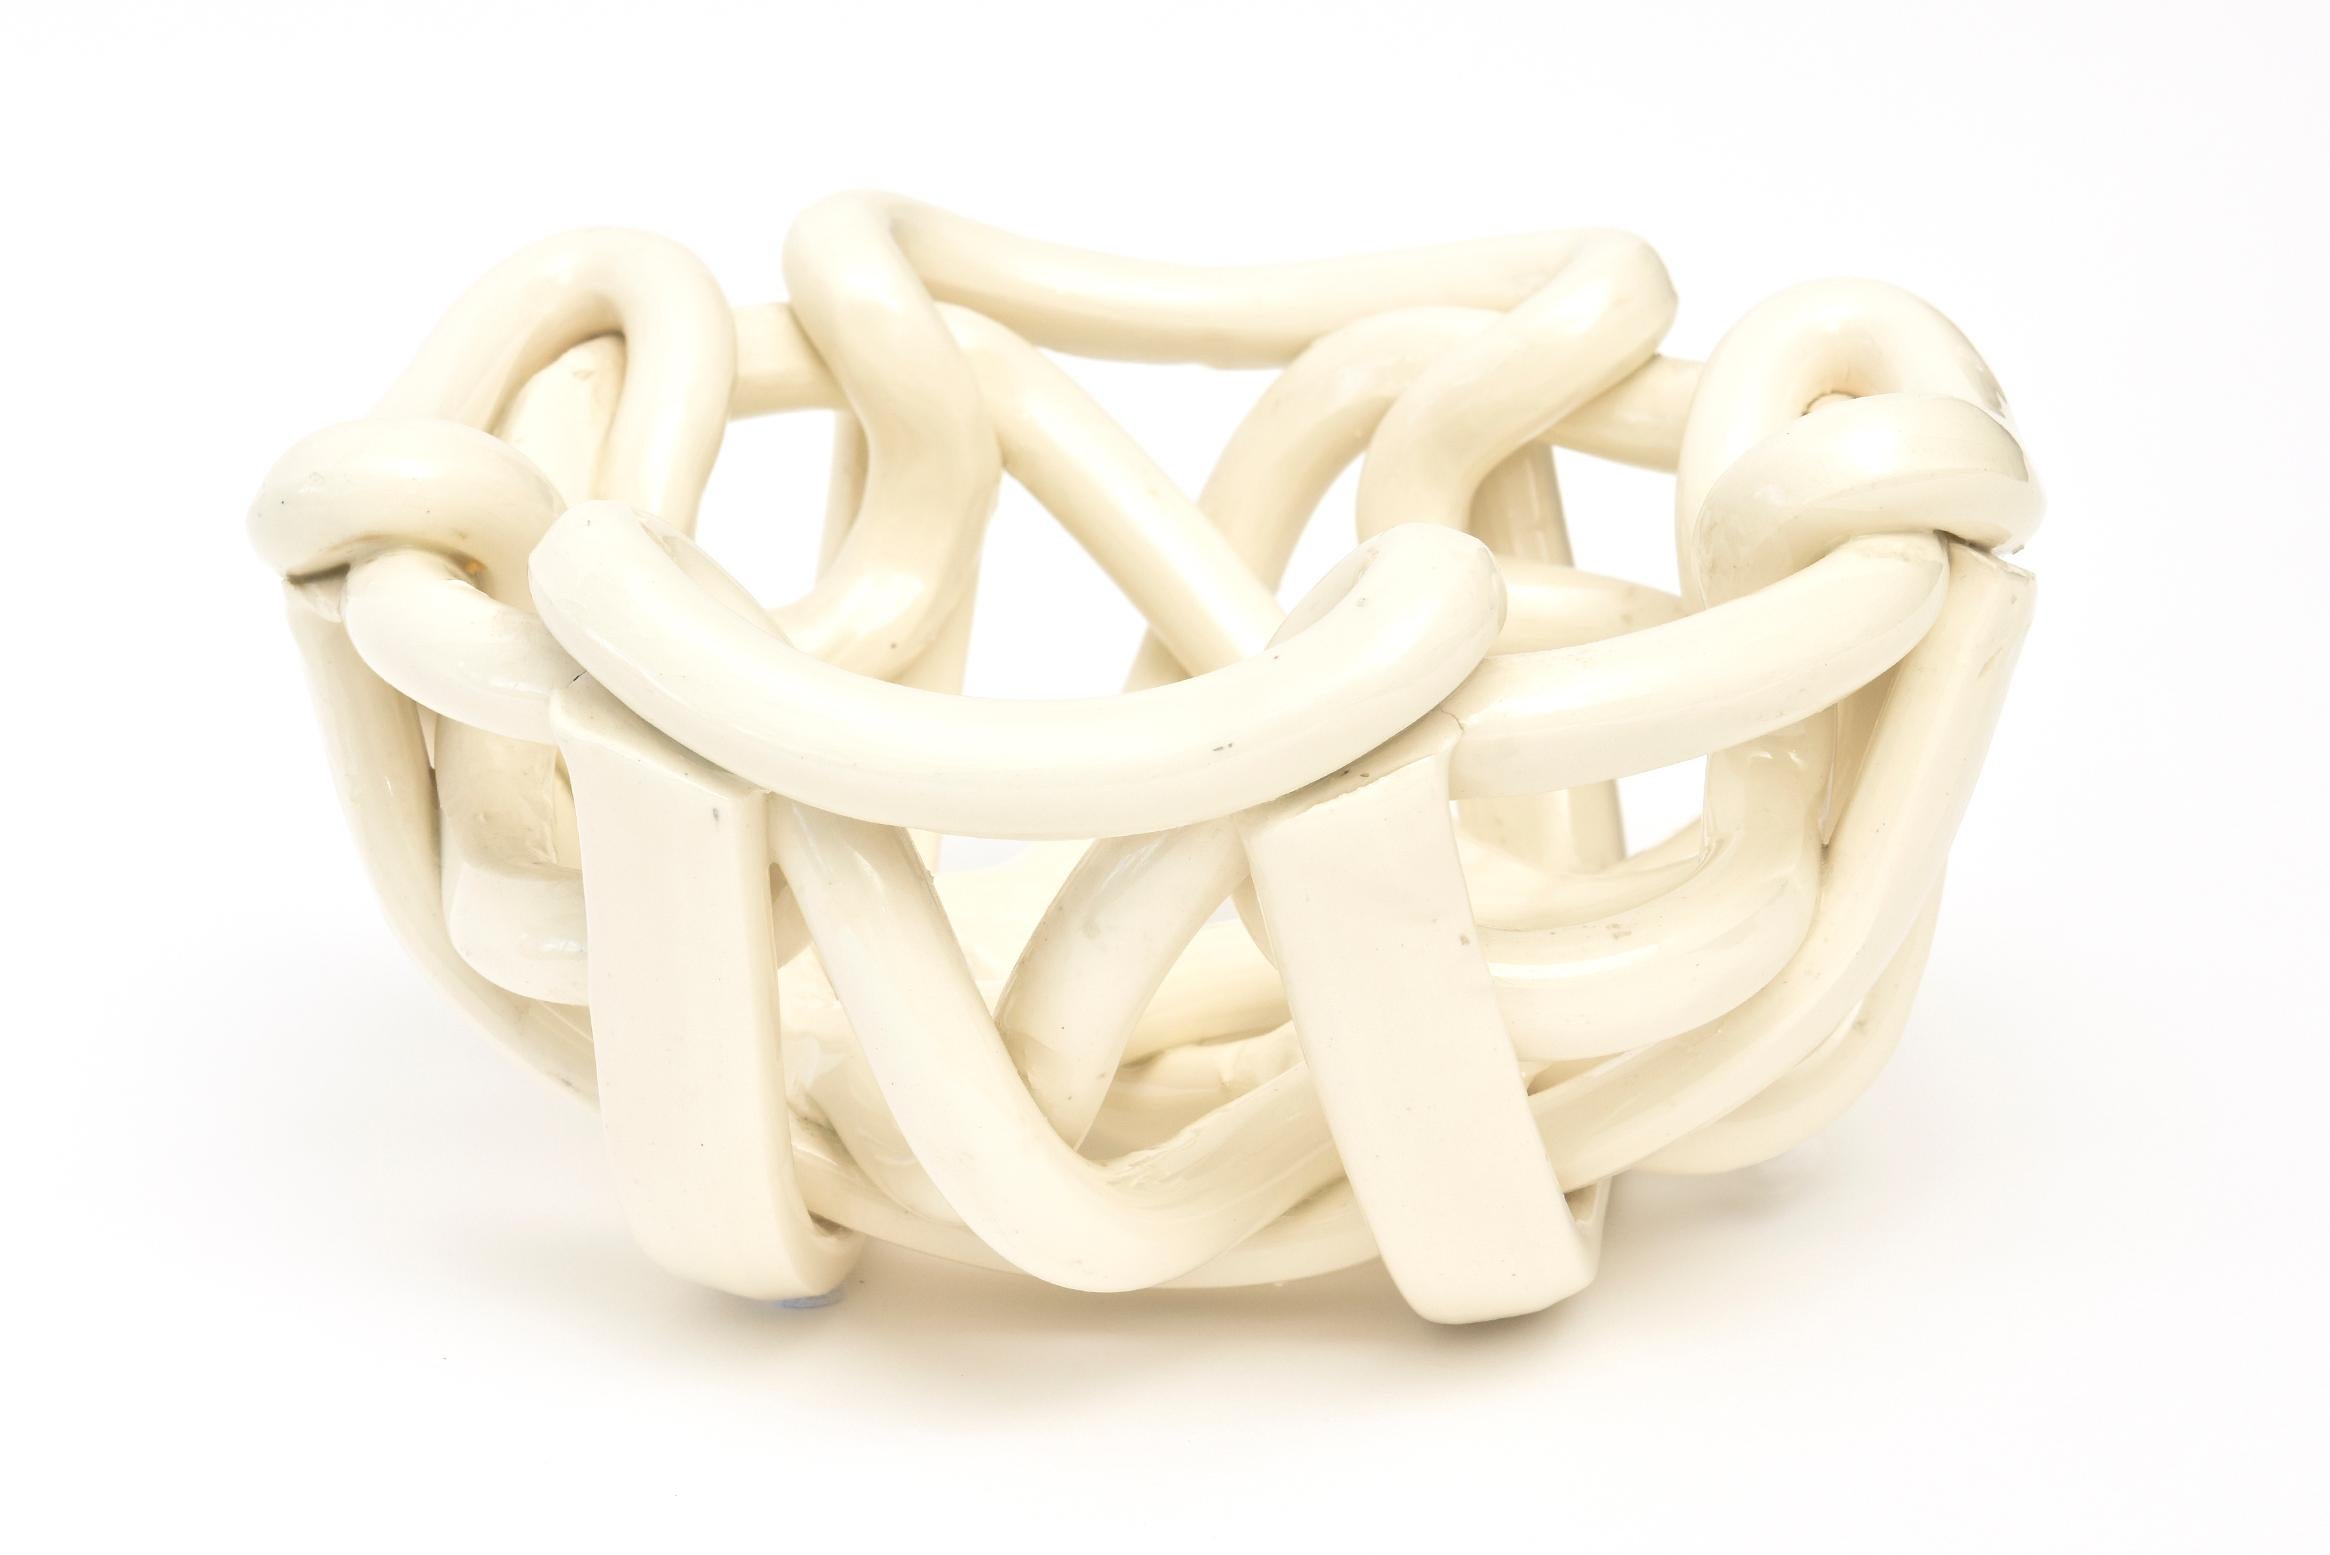 This sculptural twisted and coiled vintage ceramic bowl is from the 1970s. It is American yet looks Italian. The color is an off-white hue. It is one long twisted piece of ceramic coiled in sculptural form. This can be used for utilitarian purposes